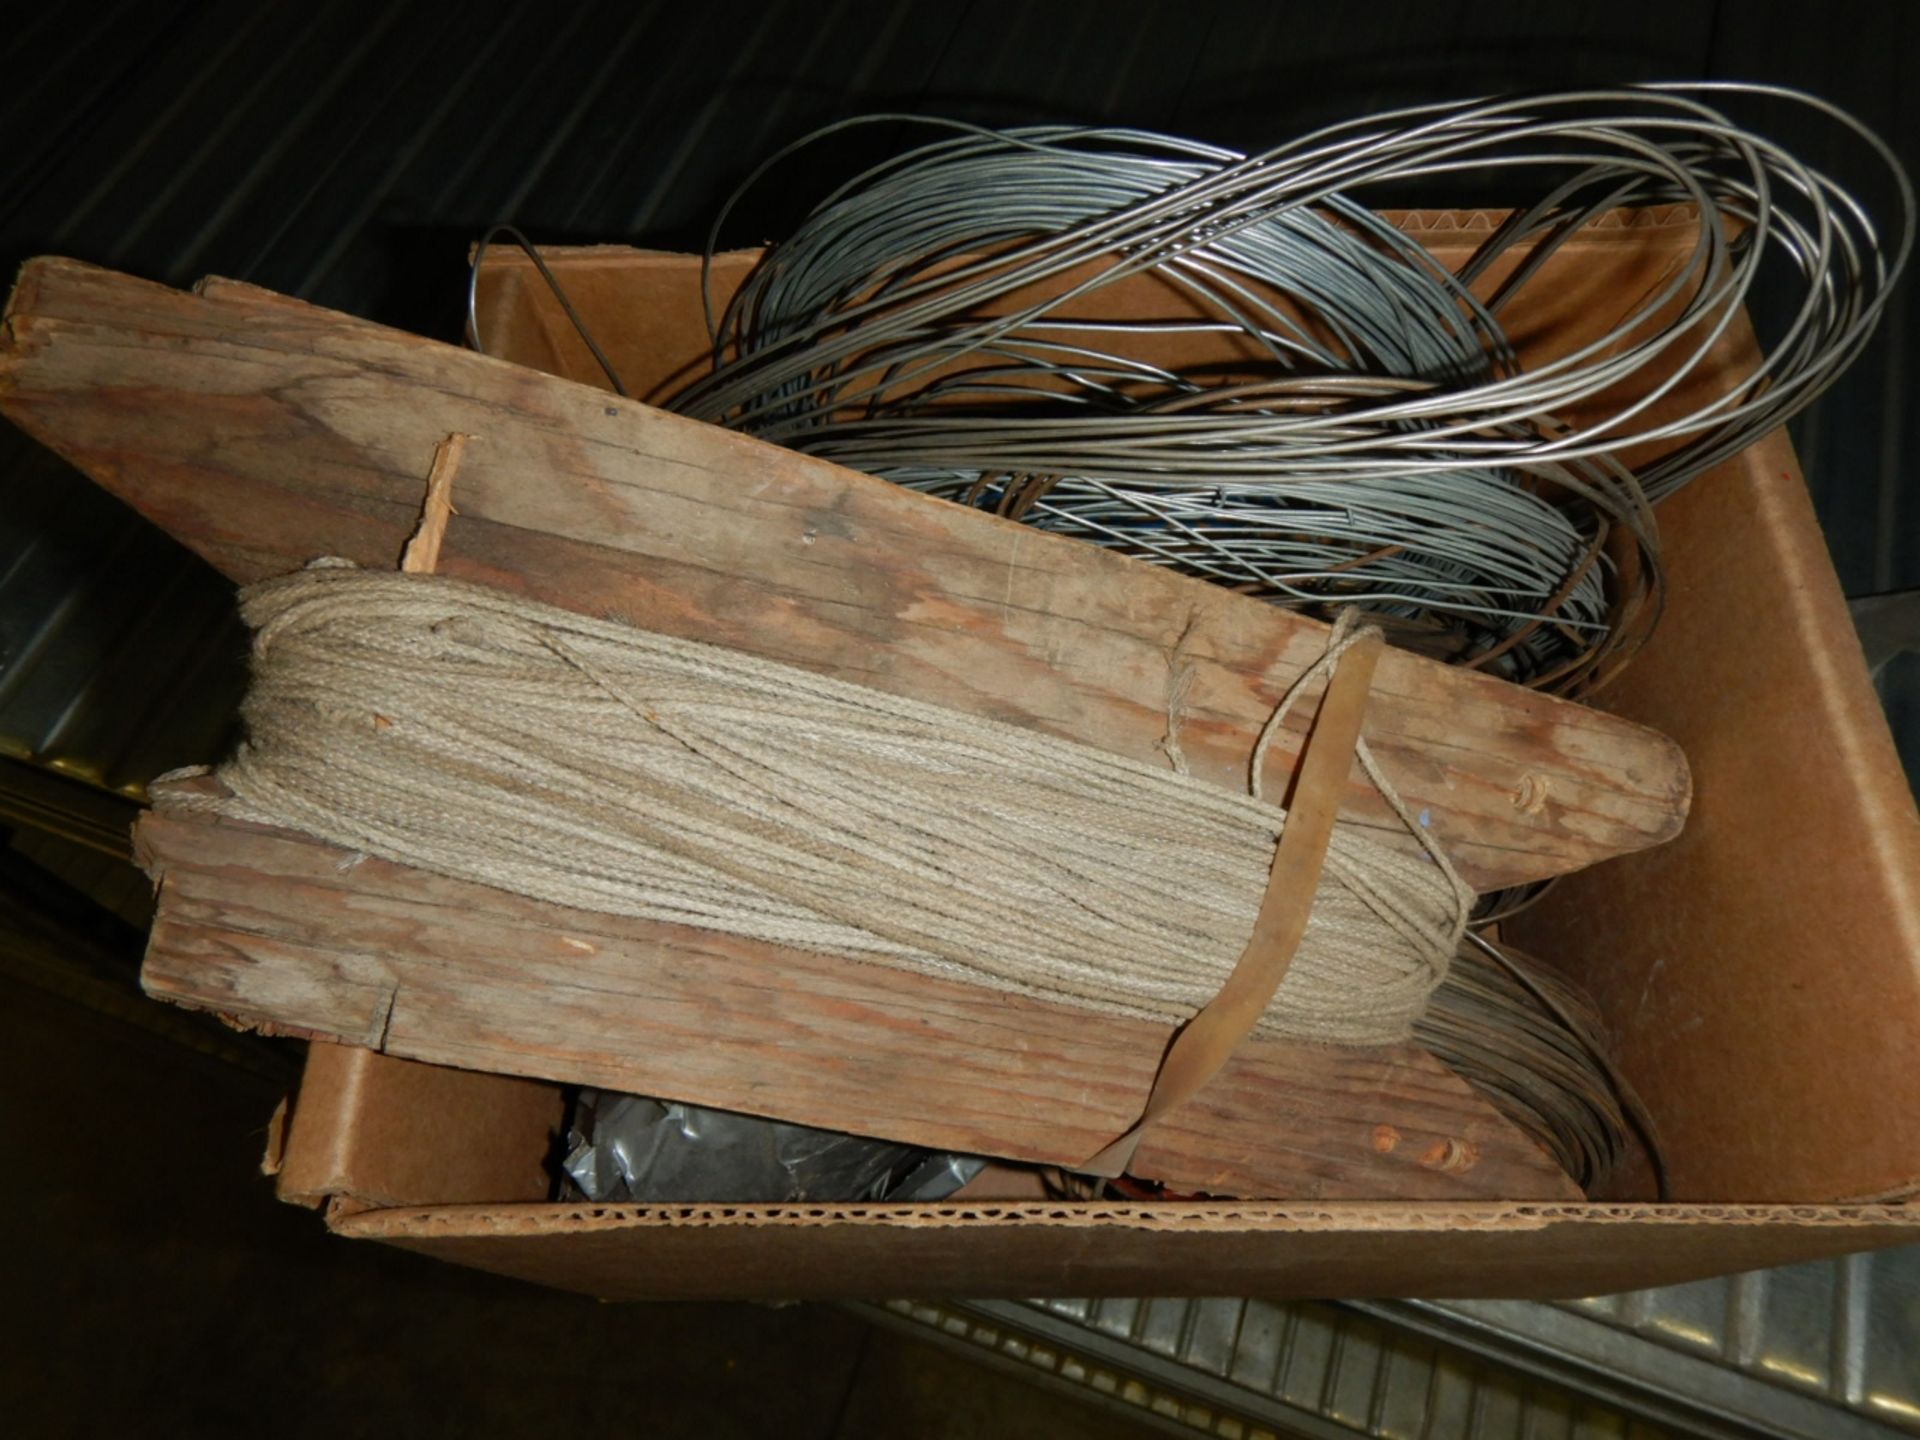 2-RV SCREW JACKS AND ASSORTED TIE WIRE - Image 2 of 3